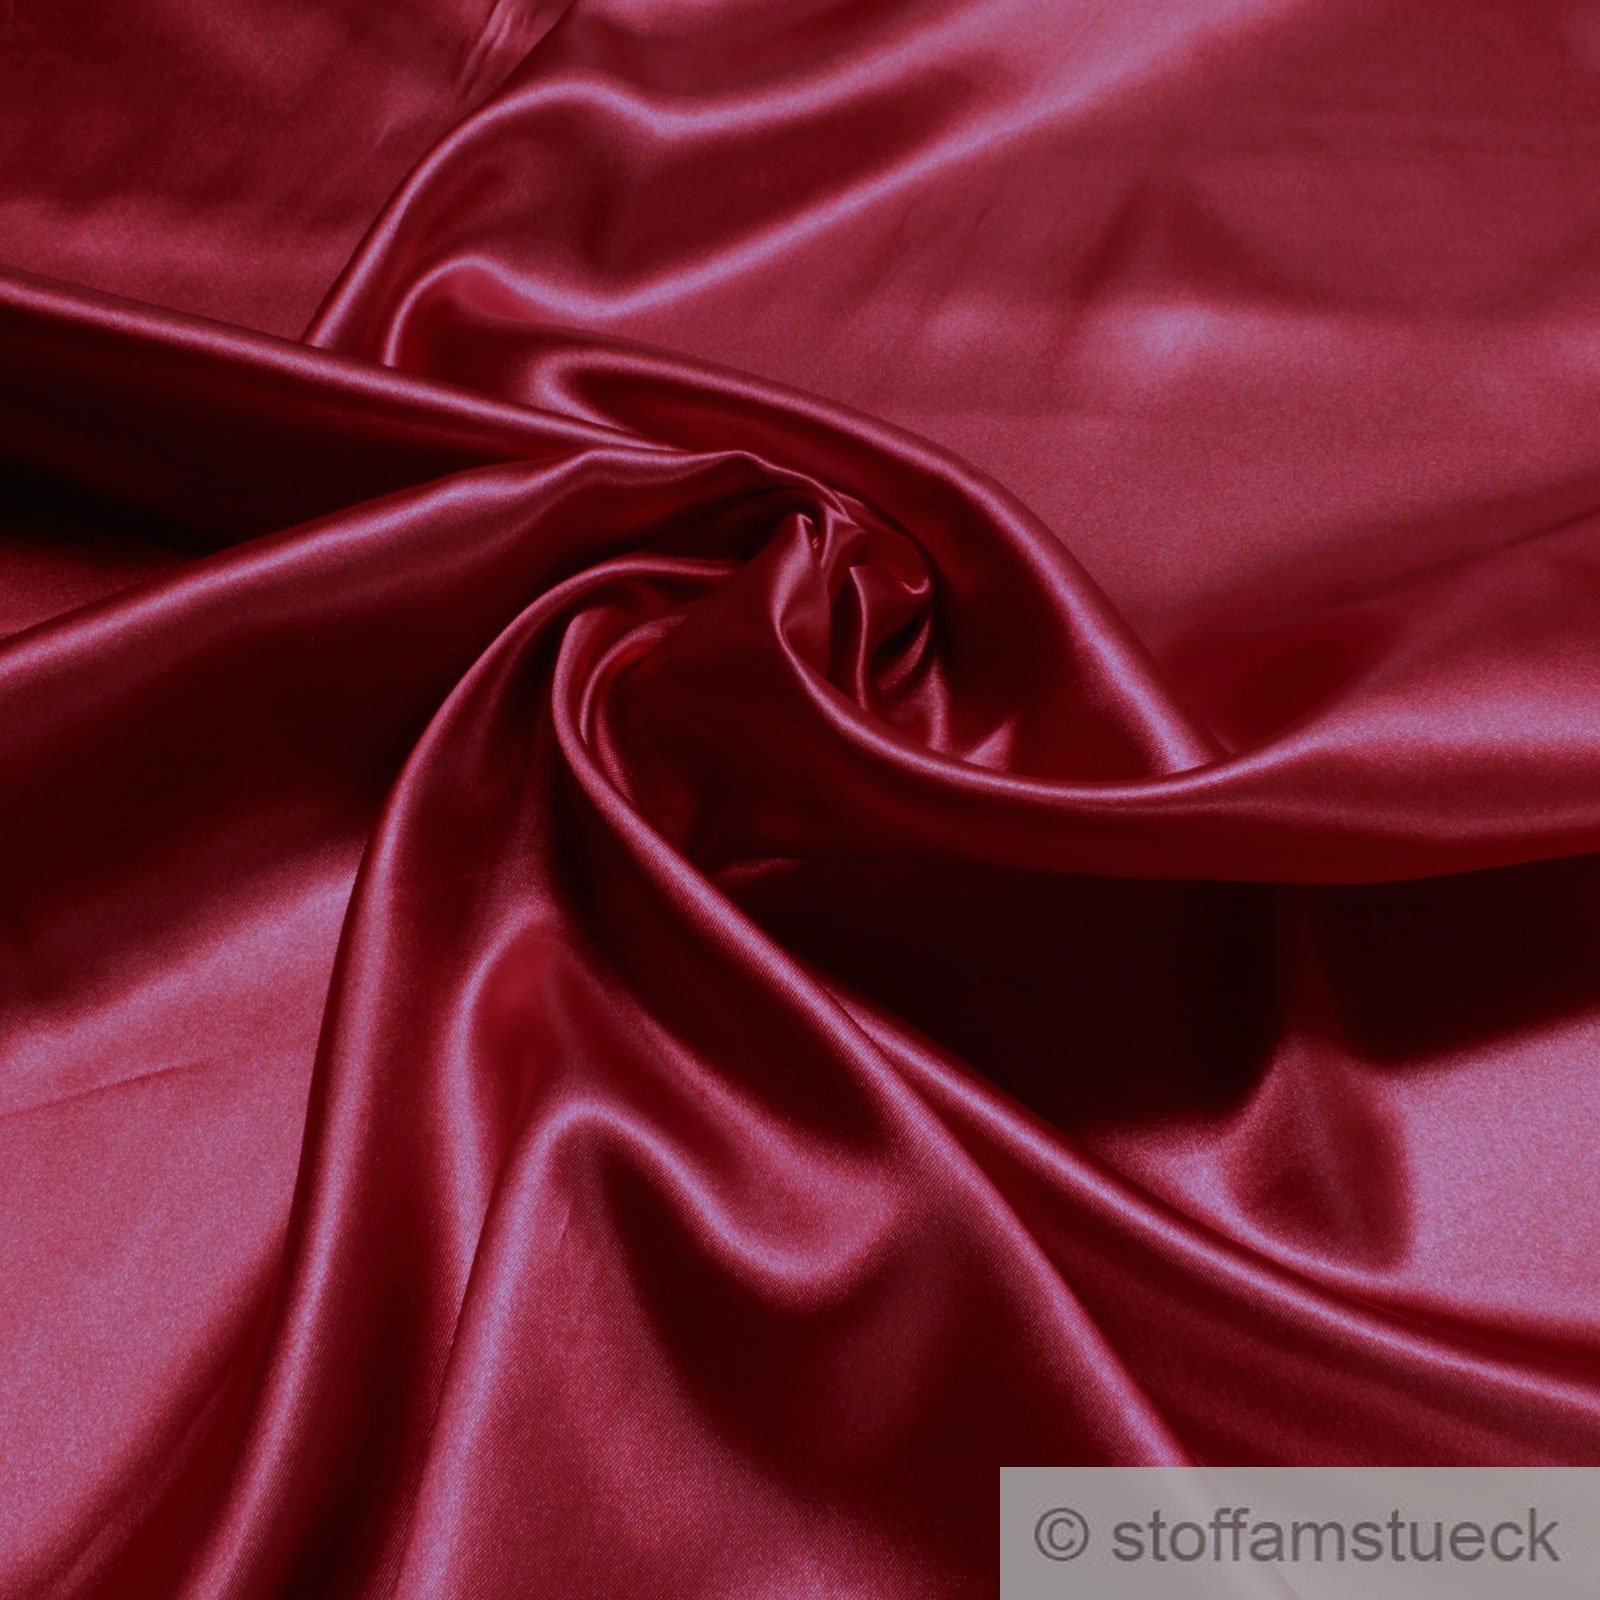 Fabric polyester satin cherry red opaque light bright flat